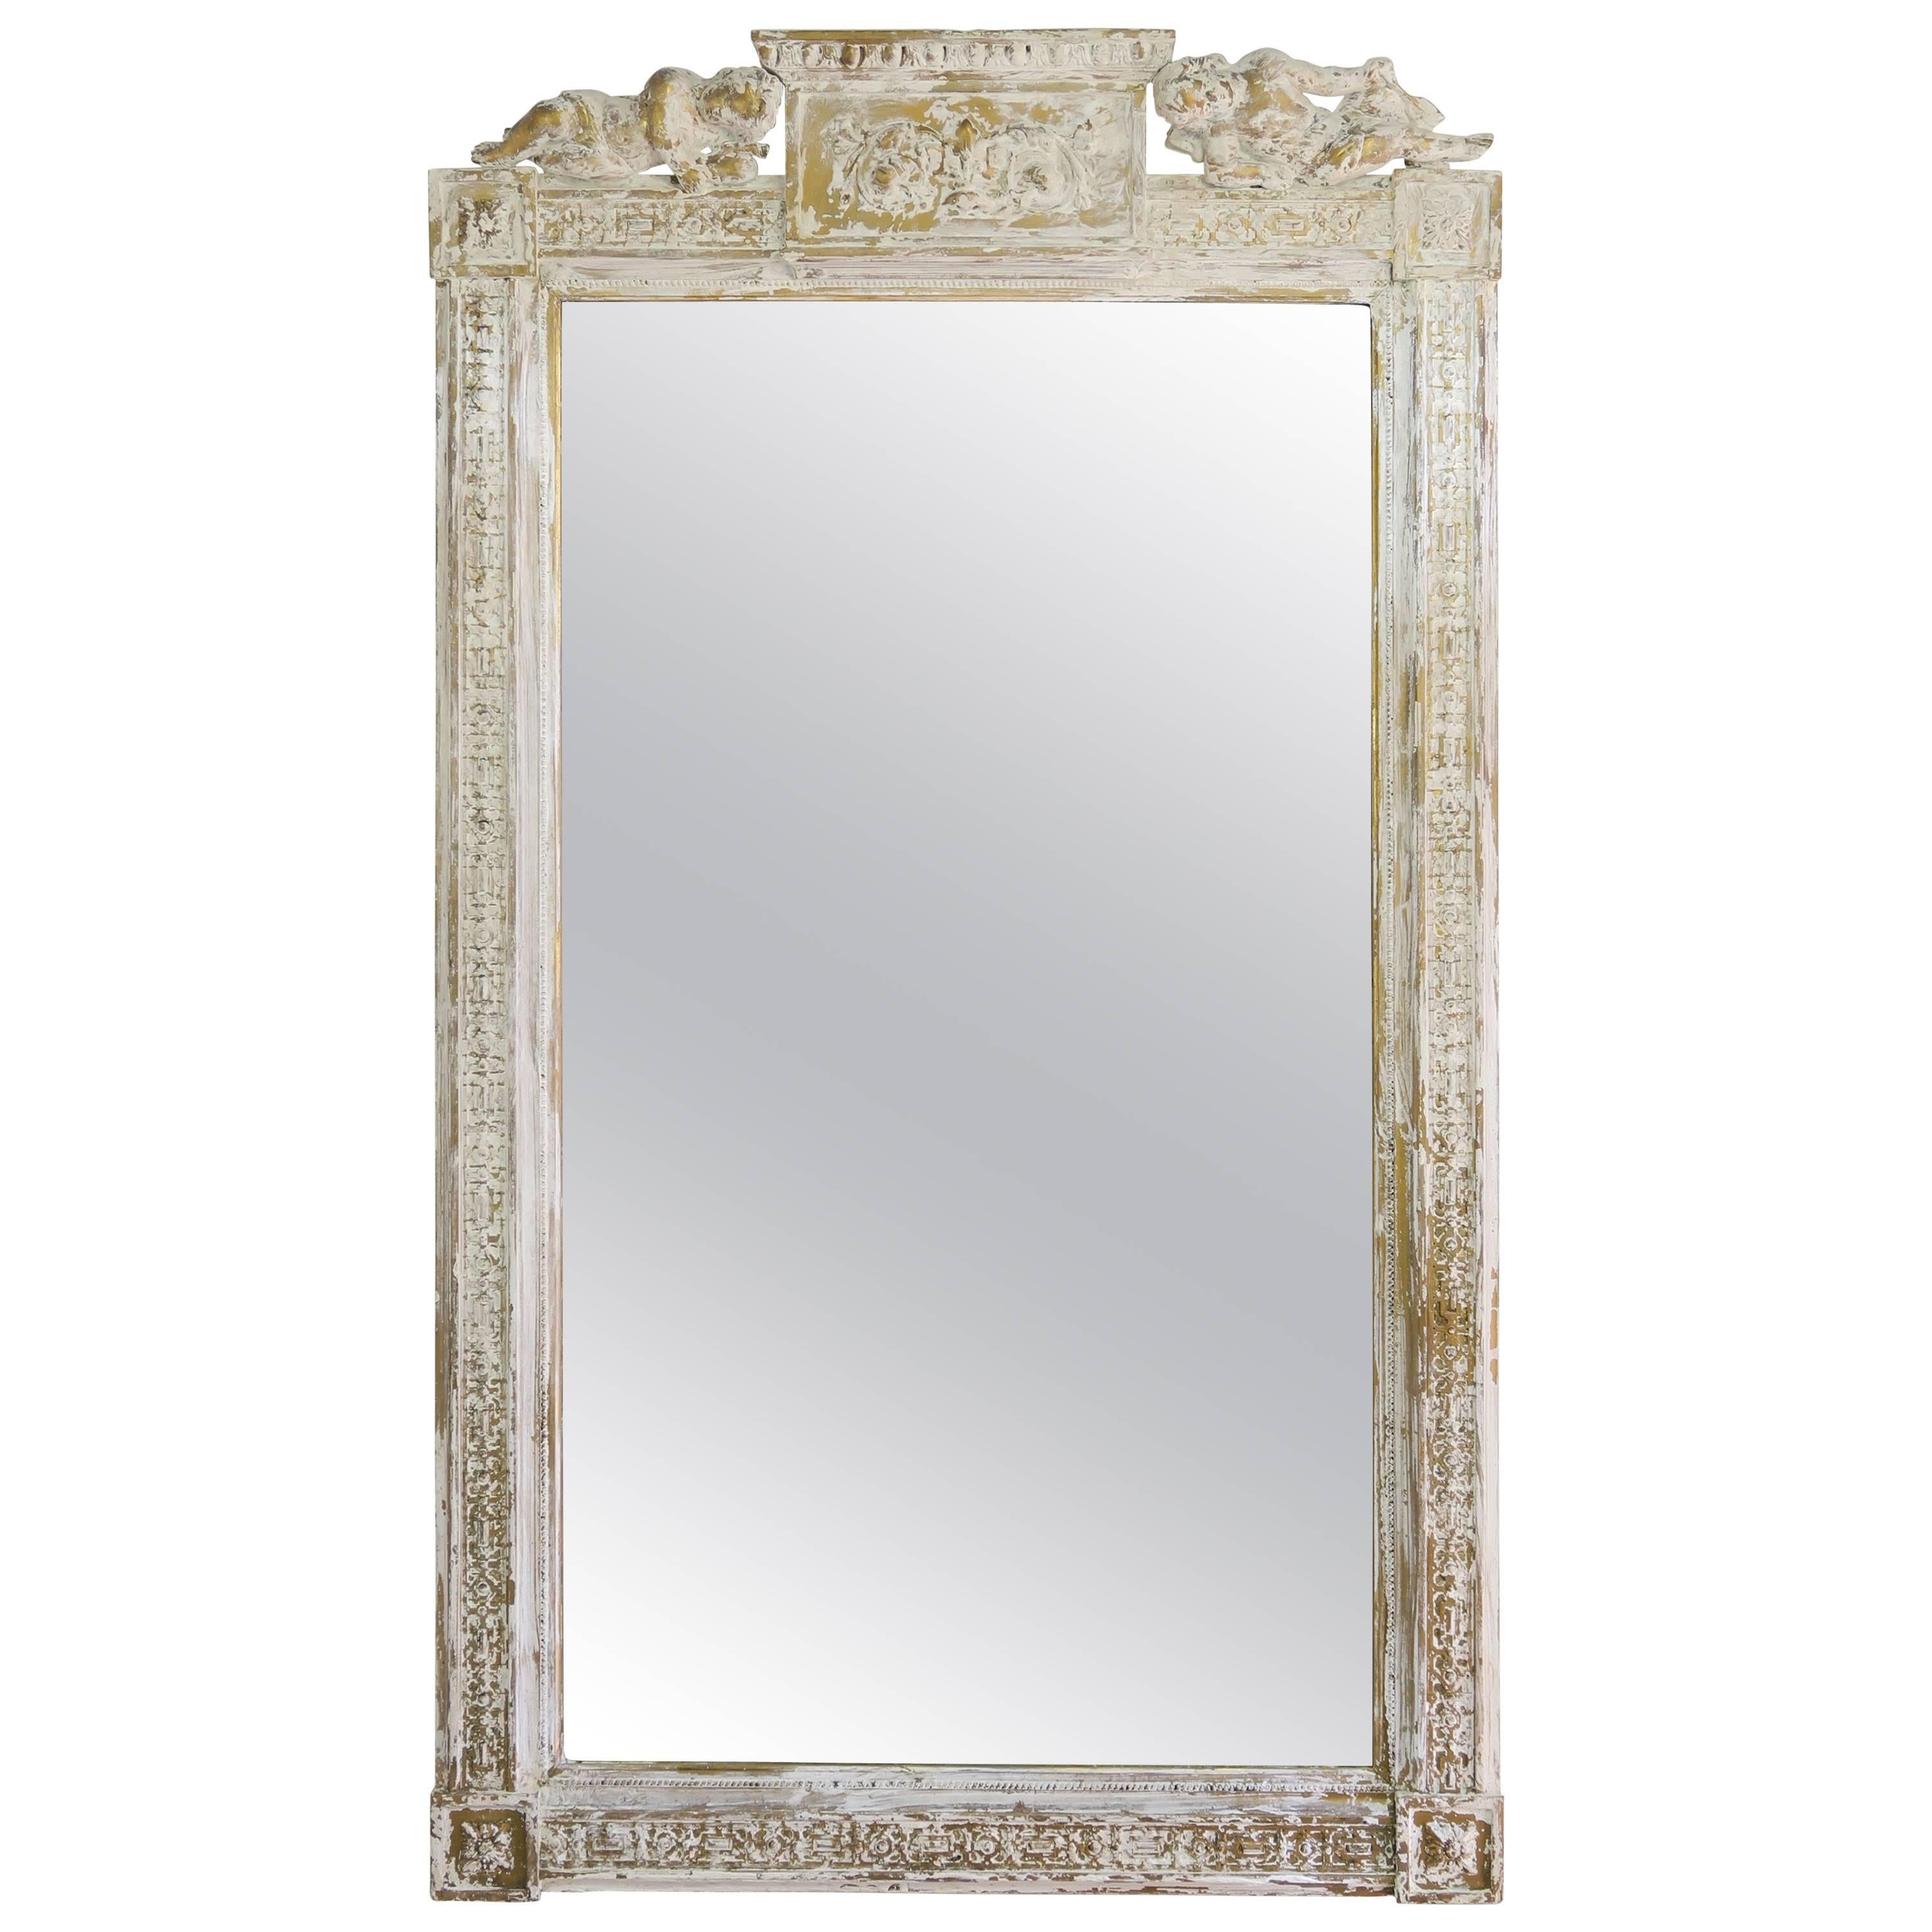 Italian Painted Neoclassical Style Mirror with Cherubs